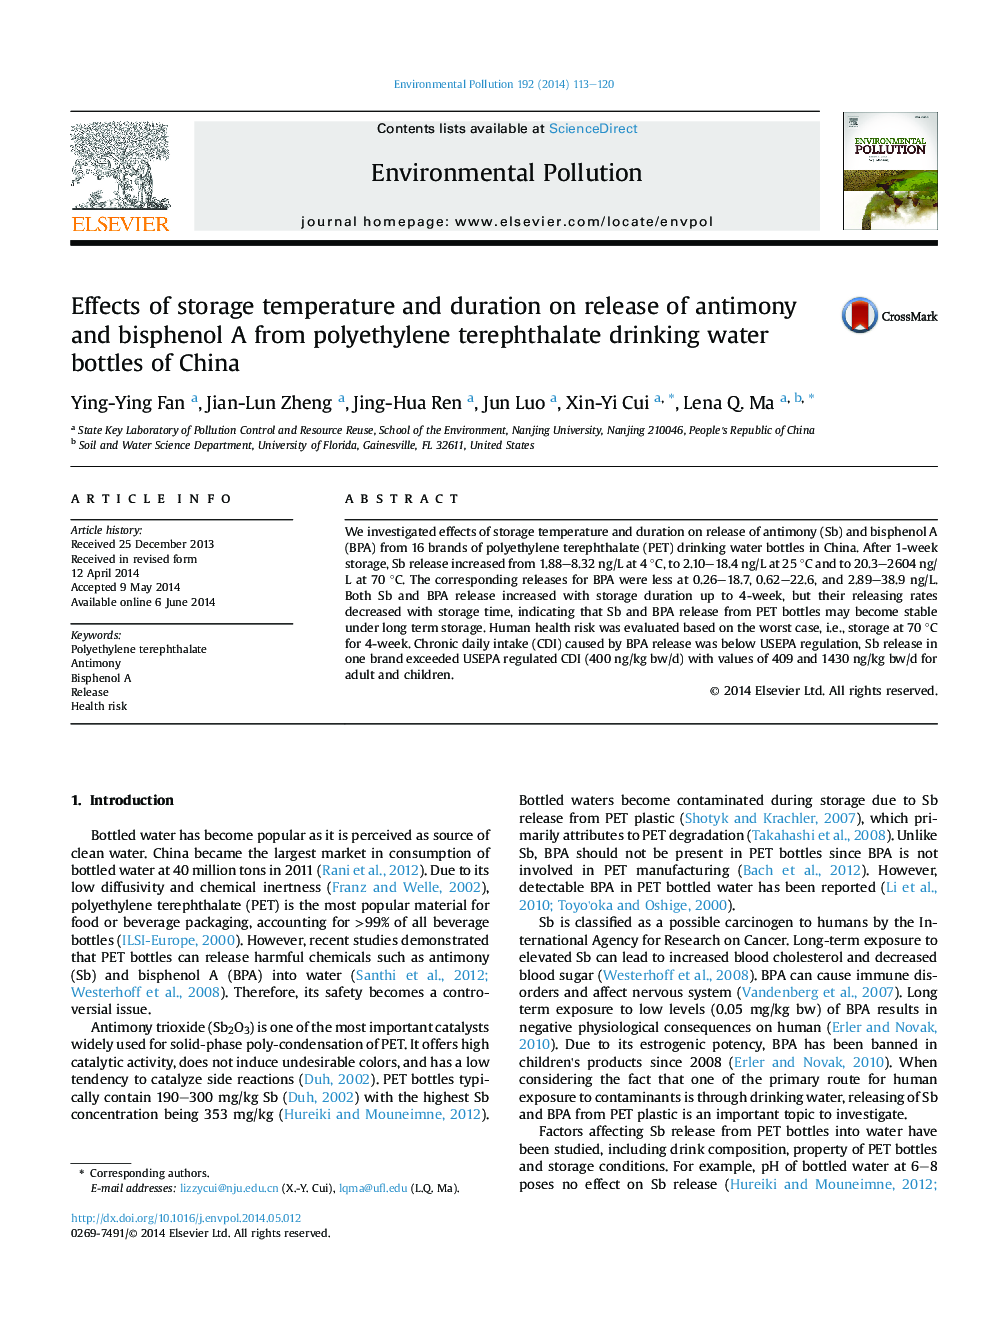 Effects of storage temperature and duration on release of antimony and bisphenol A from polyethylene terephthalate drinking water bottles of China